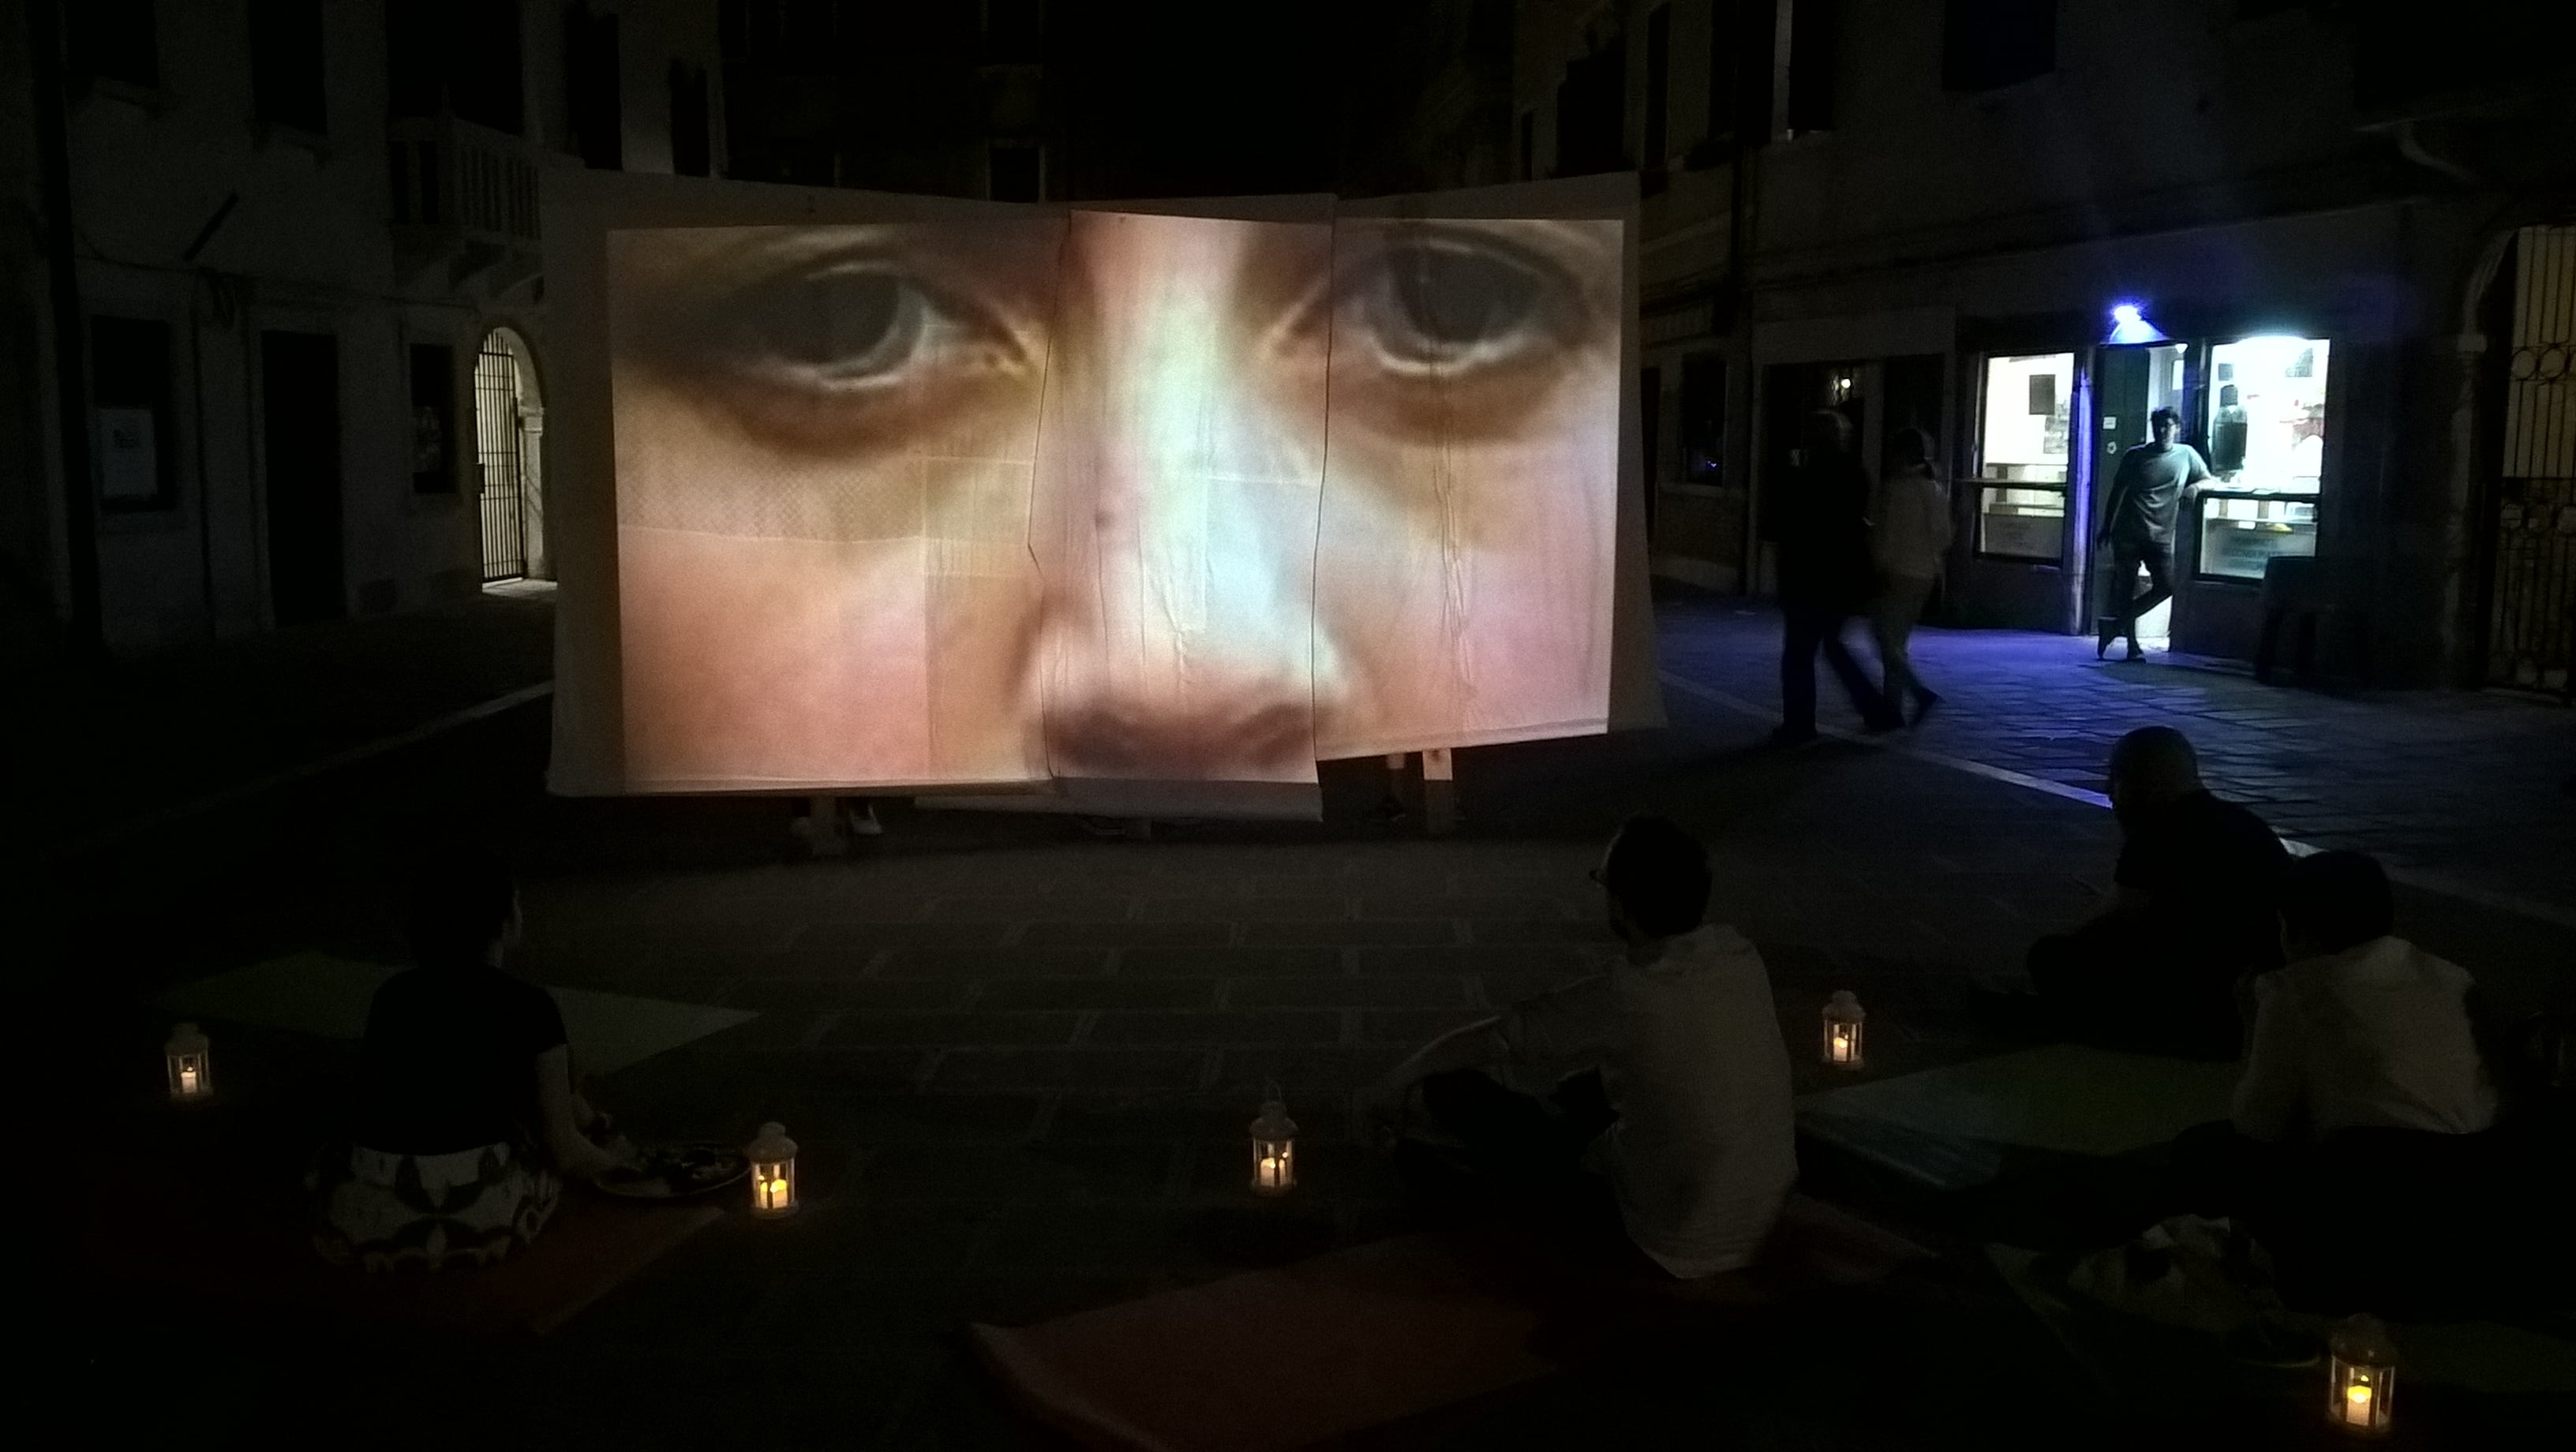 A projection screen in a street is showing a close-up of someone’s face. The scene is dark but candlelit with signs of life.